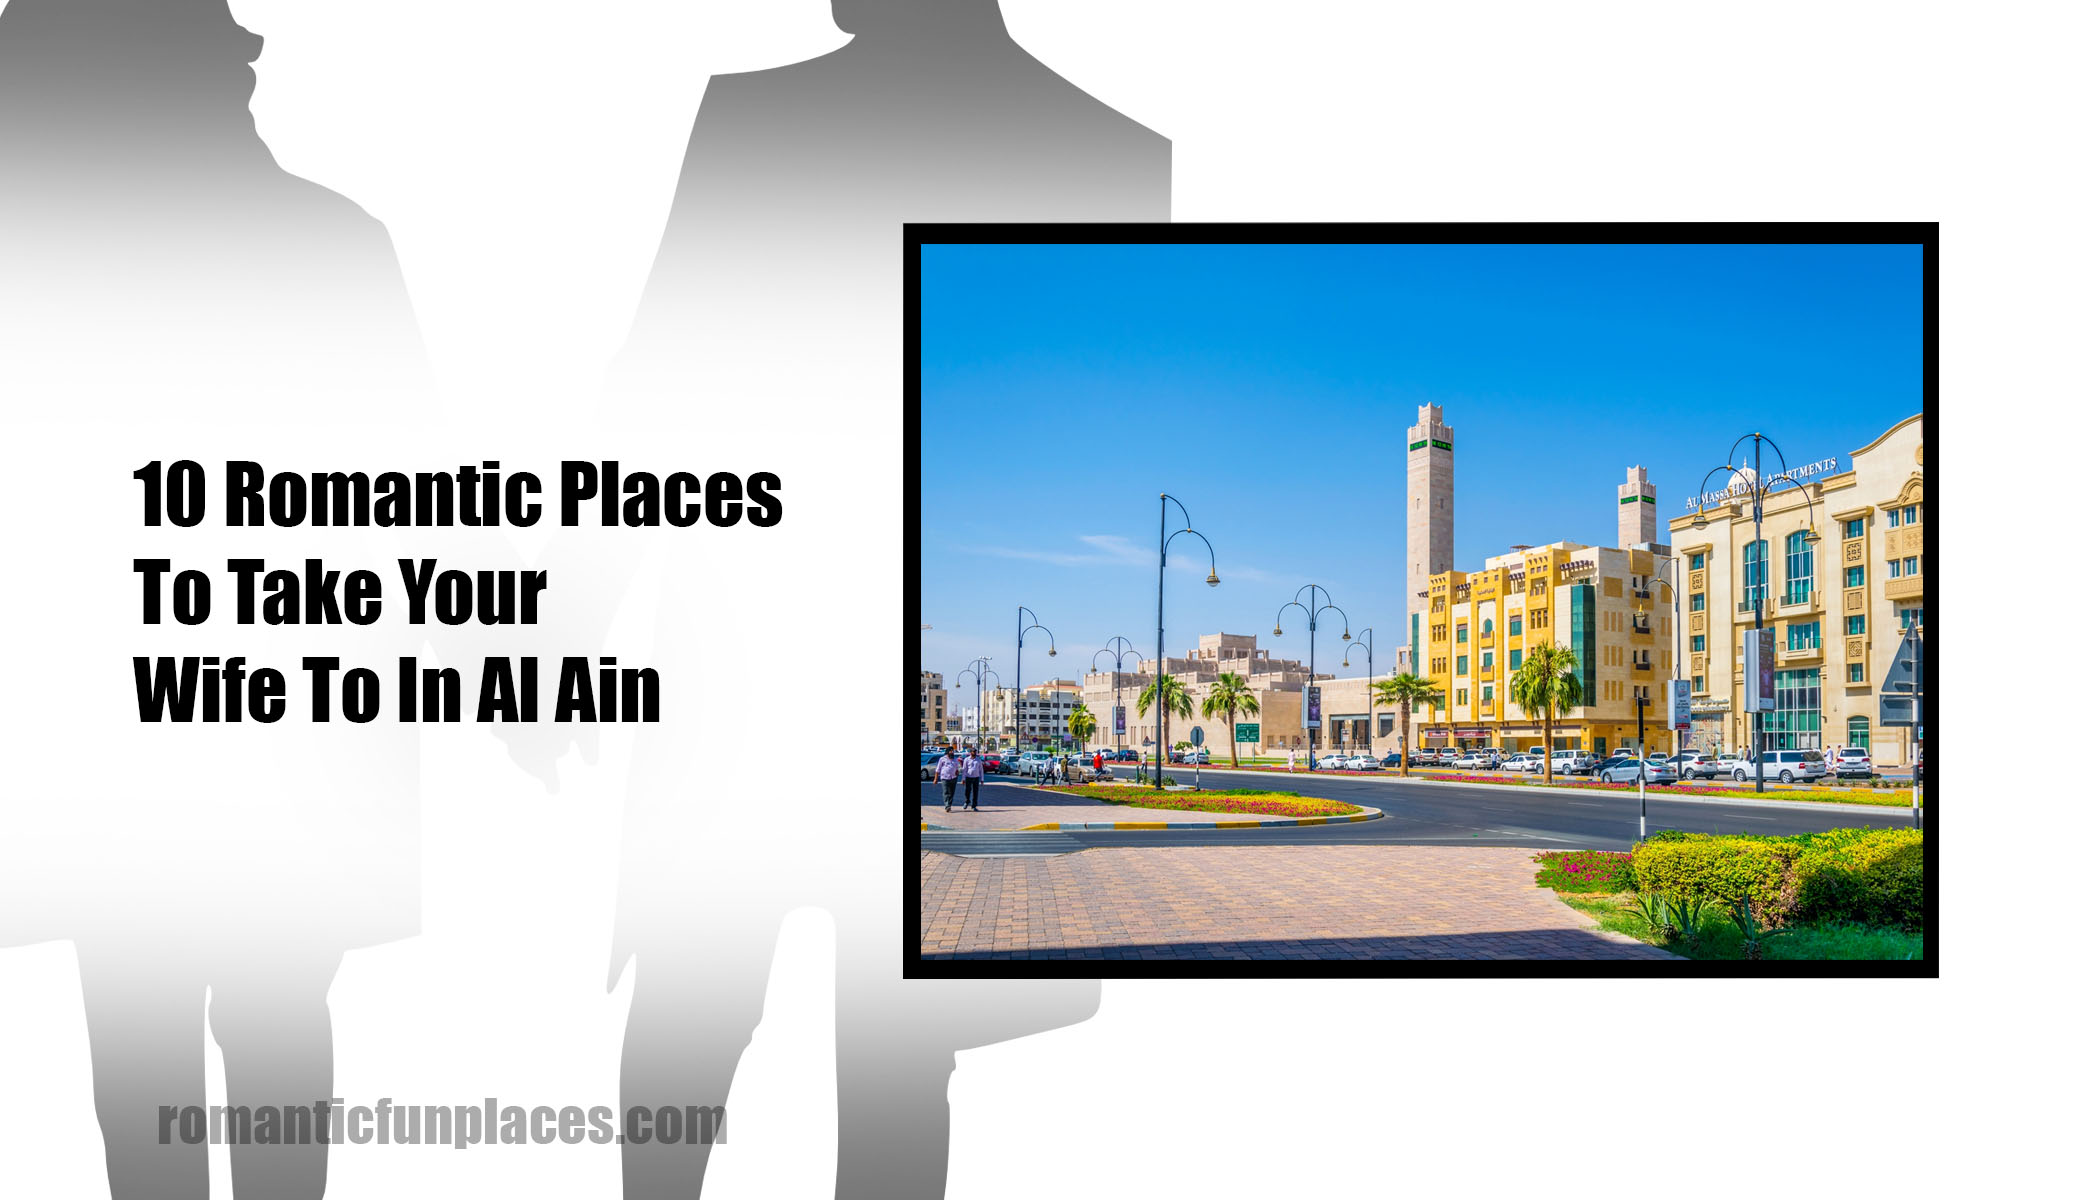 10 Romantic Places To Take Your Wife To In Al Ain